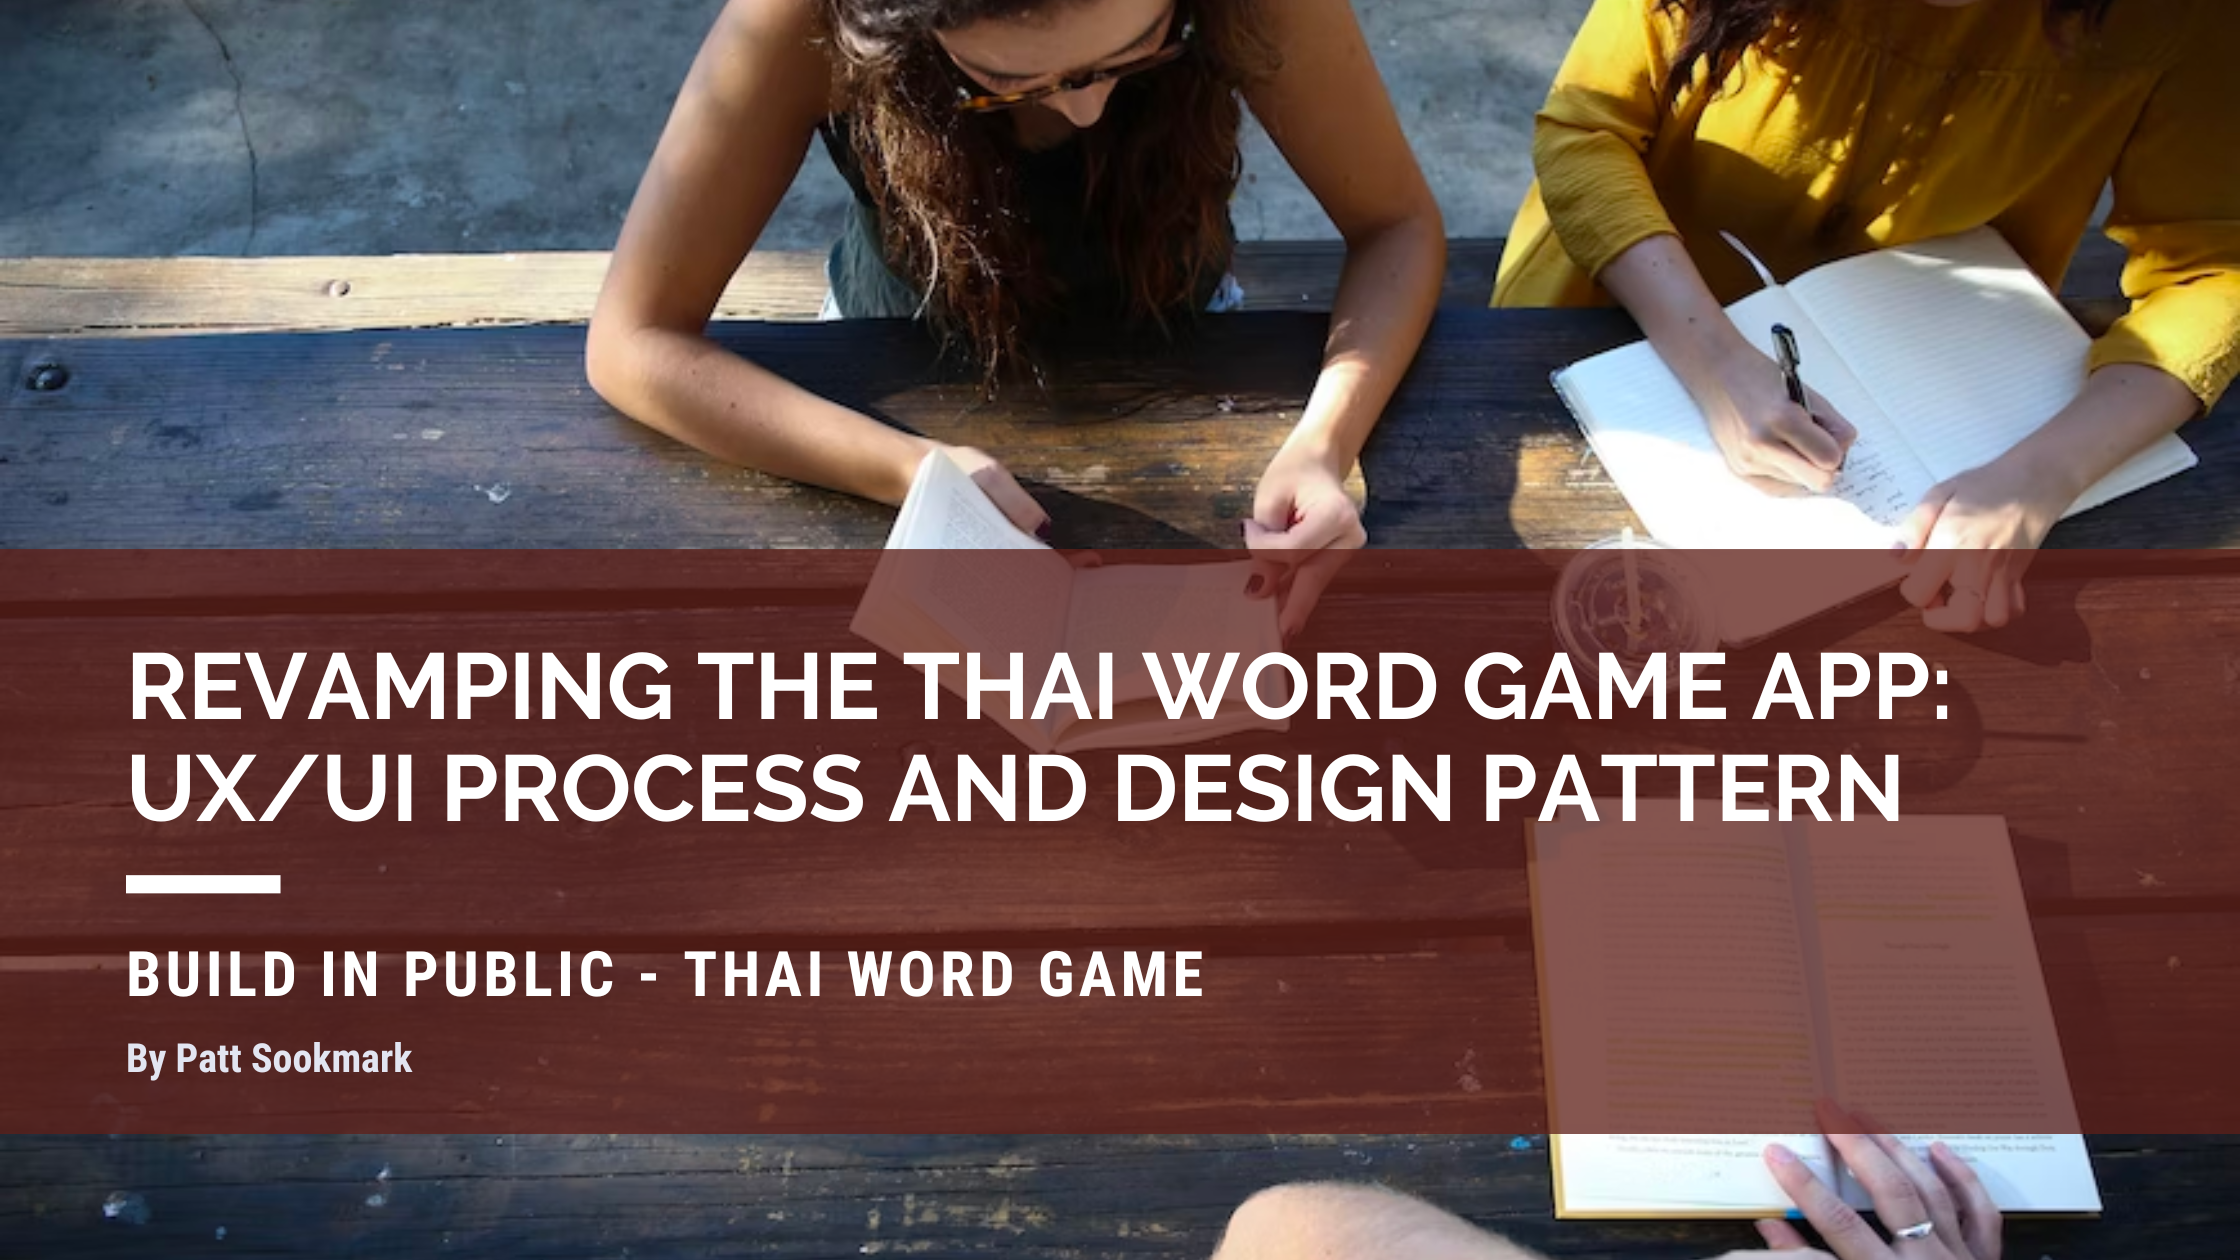 Revamping the Thai Word Game App: Lessons in UX/UI and Design Pattern